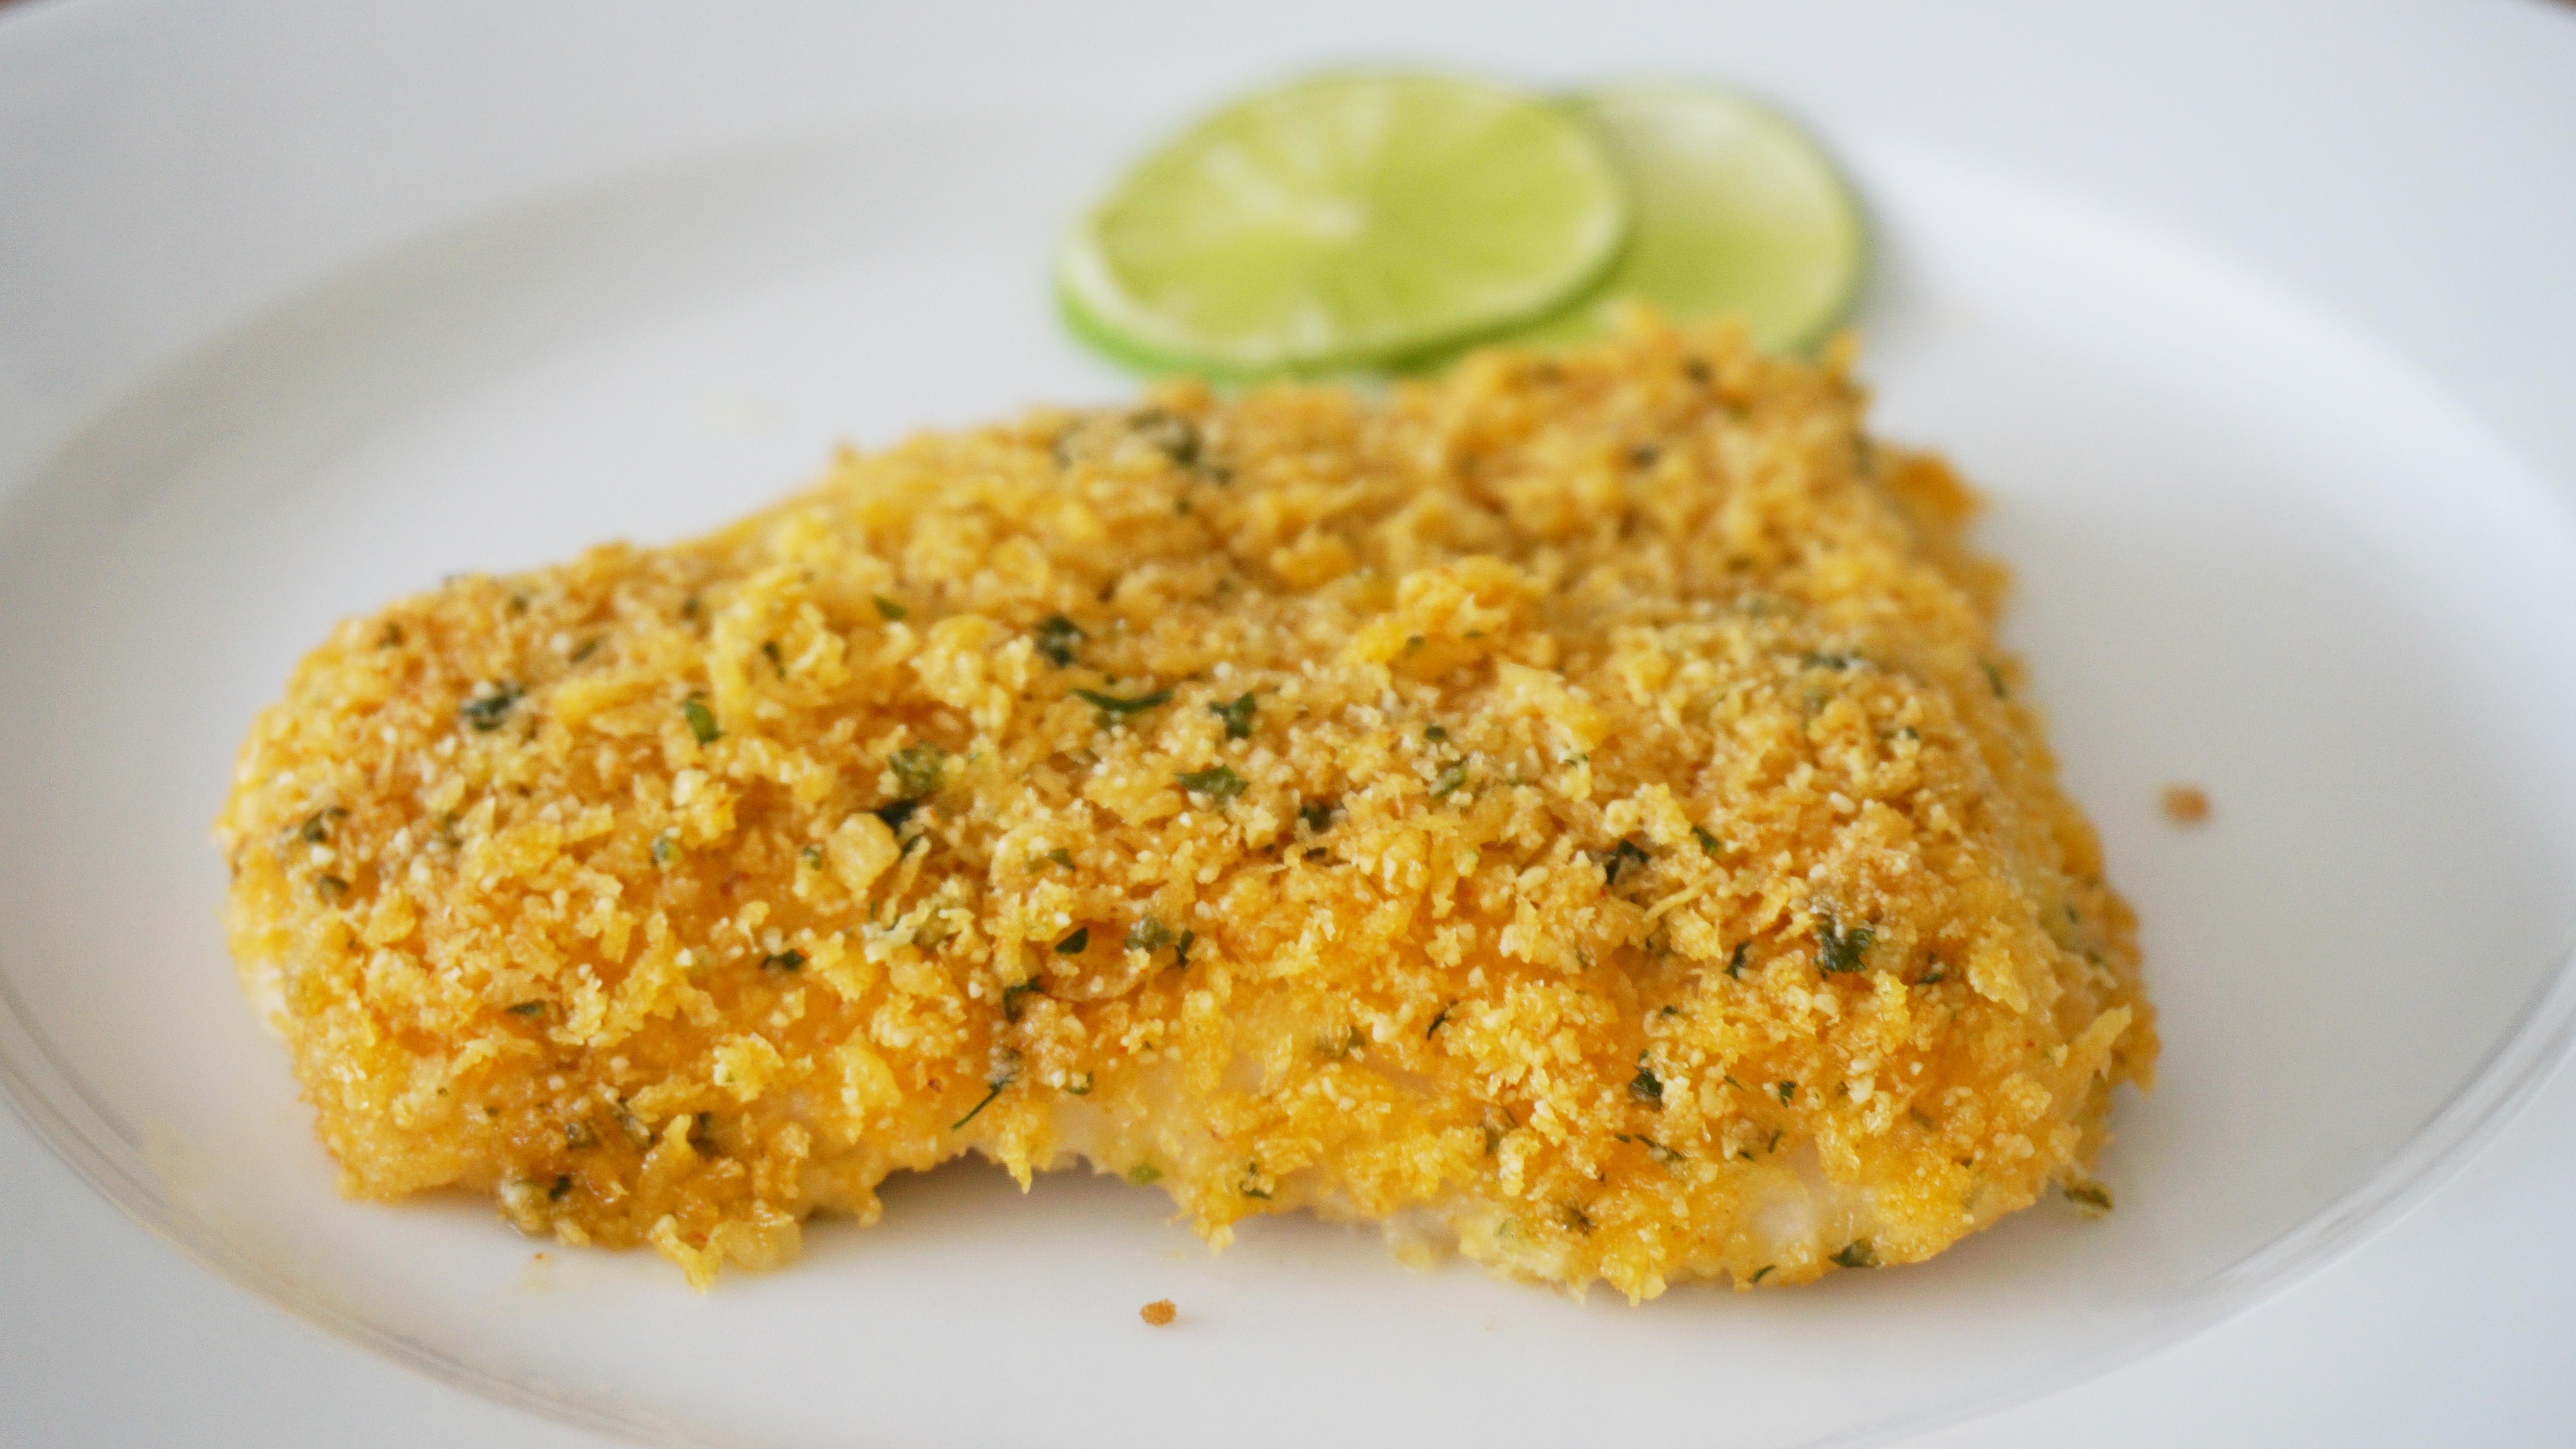 Crusted fish portion